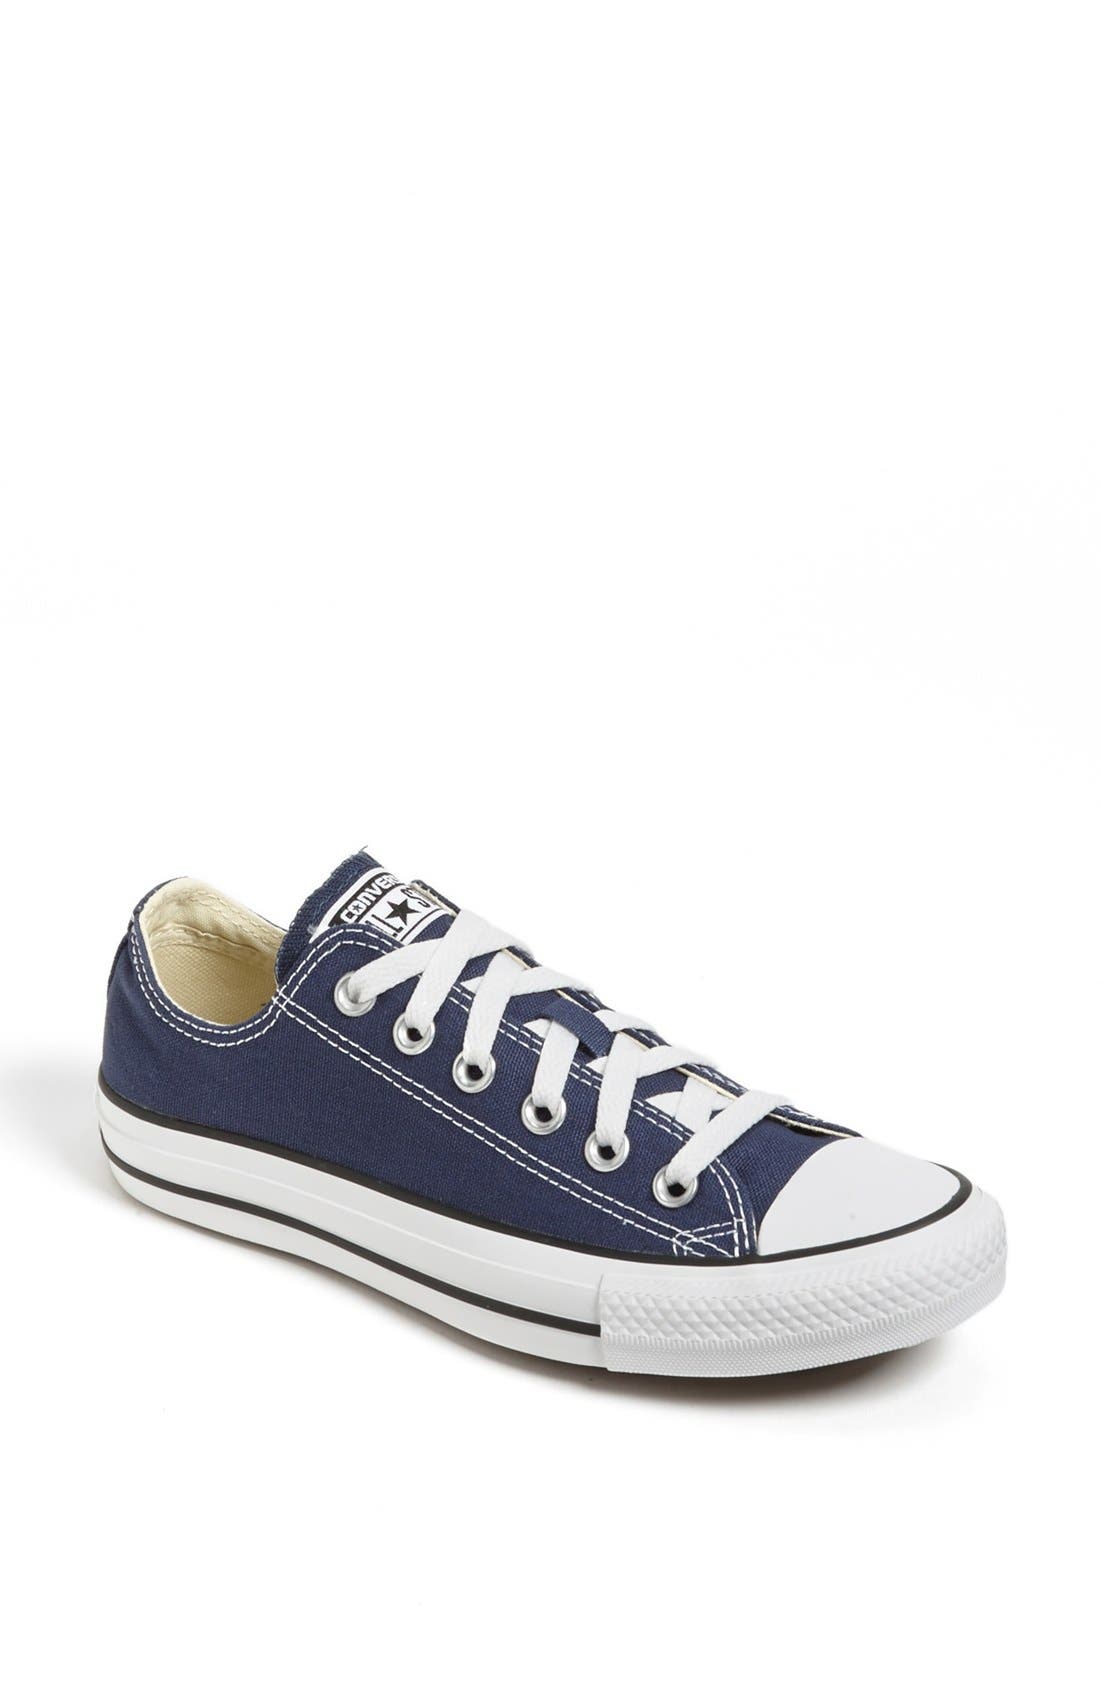 UPC 022866822909 product image for Women's Converse Chuck Taylor Low Top Sneaker, Size 10 M - Blue | upcitemdb.com